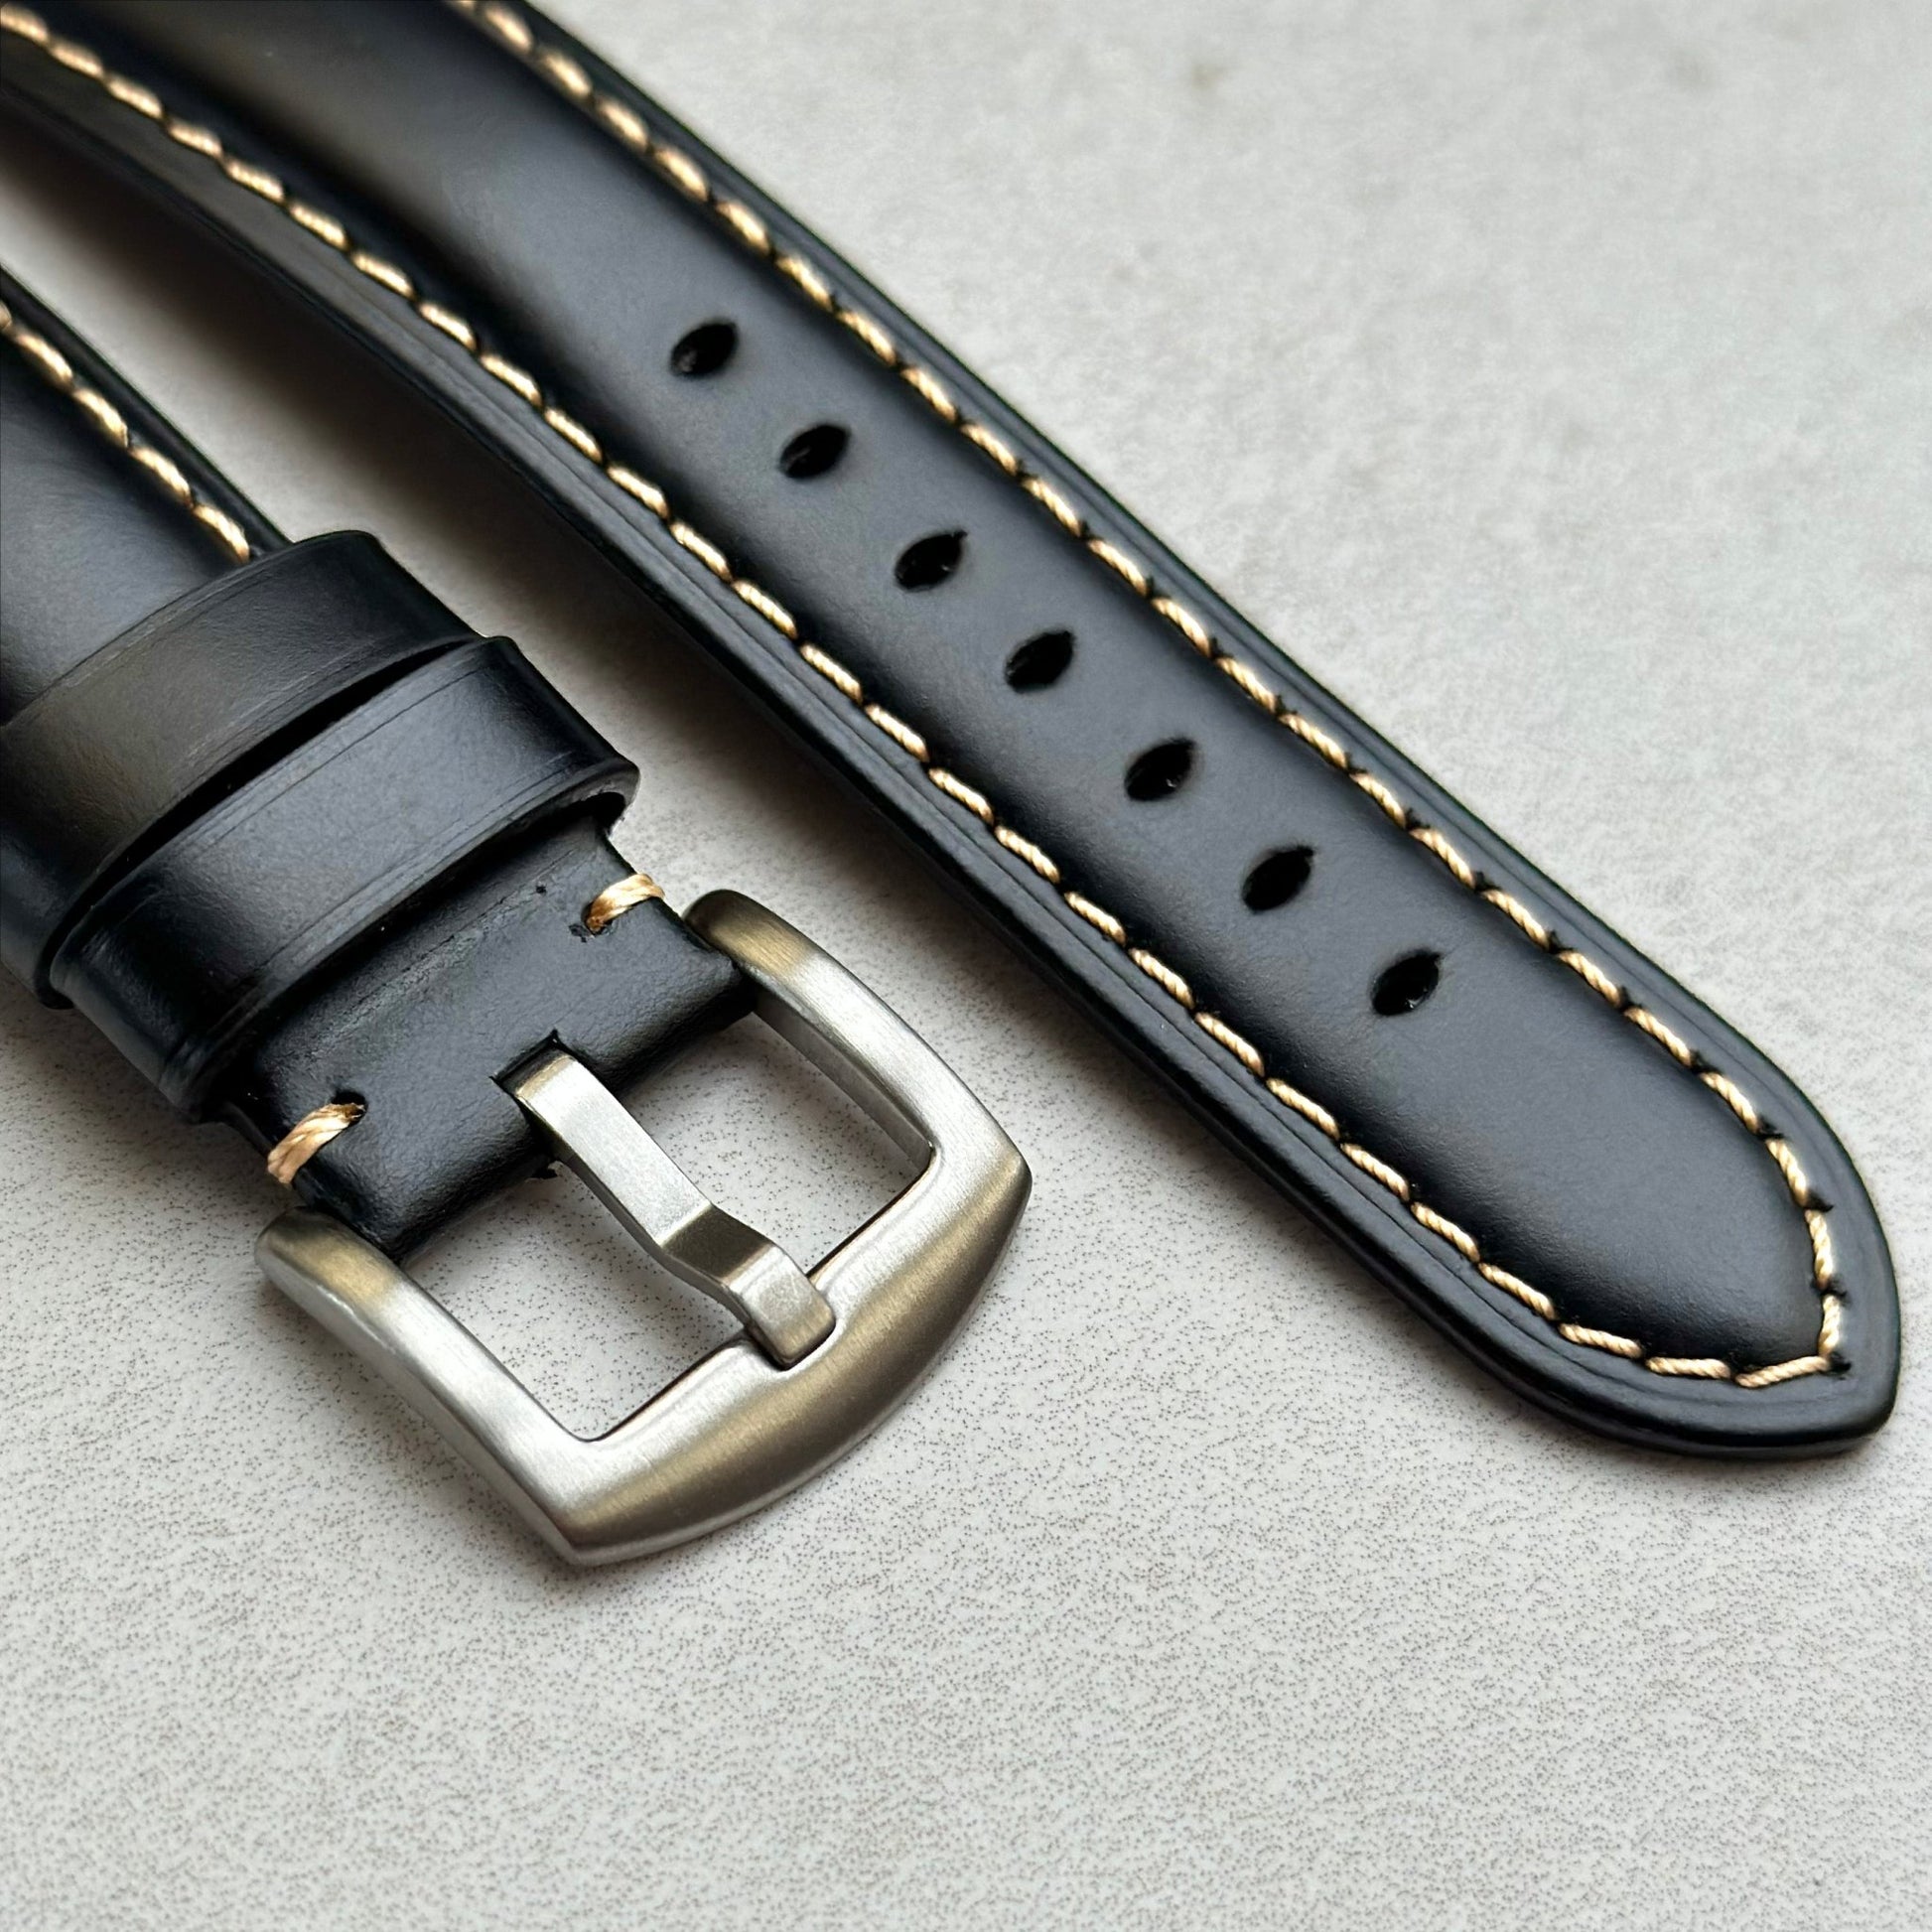 Brushed 316L stainless steel buckle on the Oslo black full grain leather watch strap. Watch And Strap.